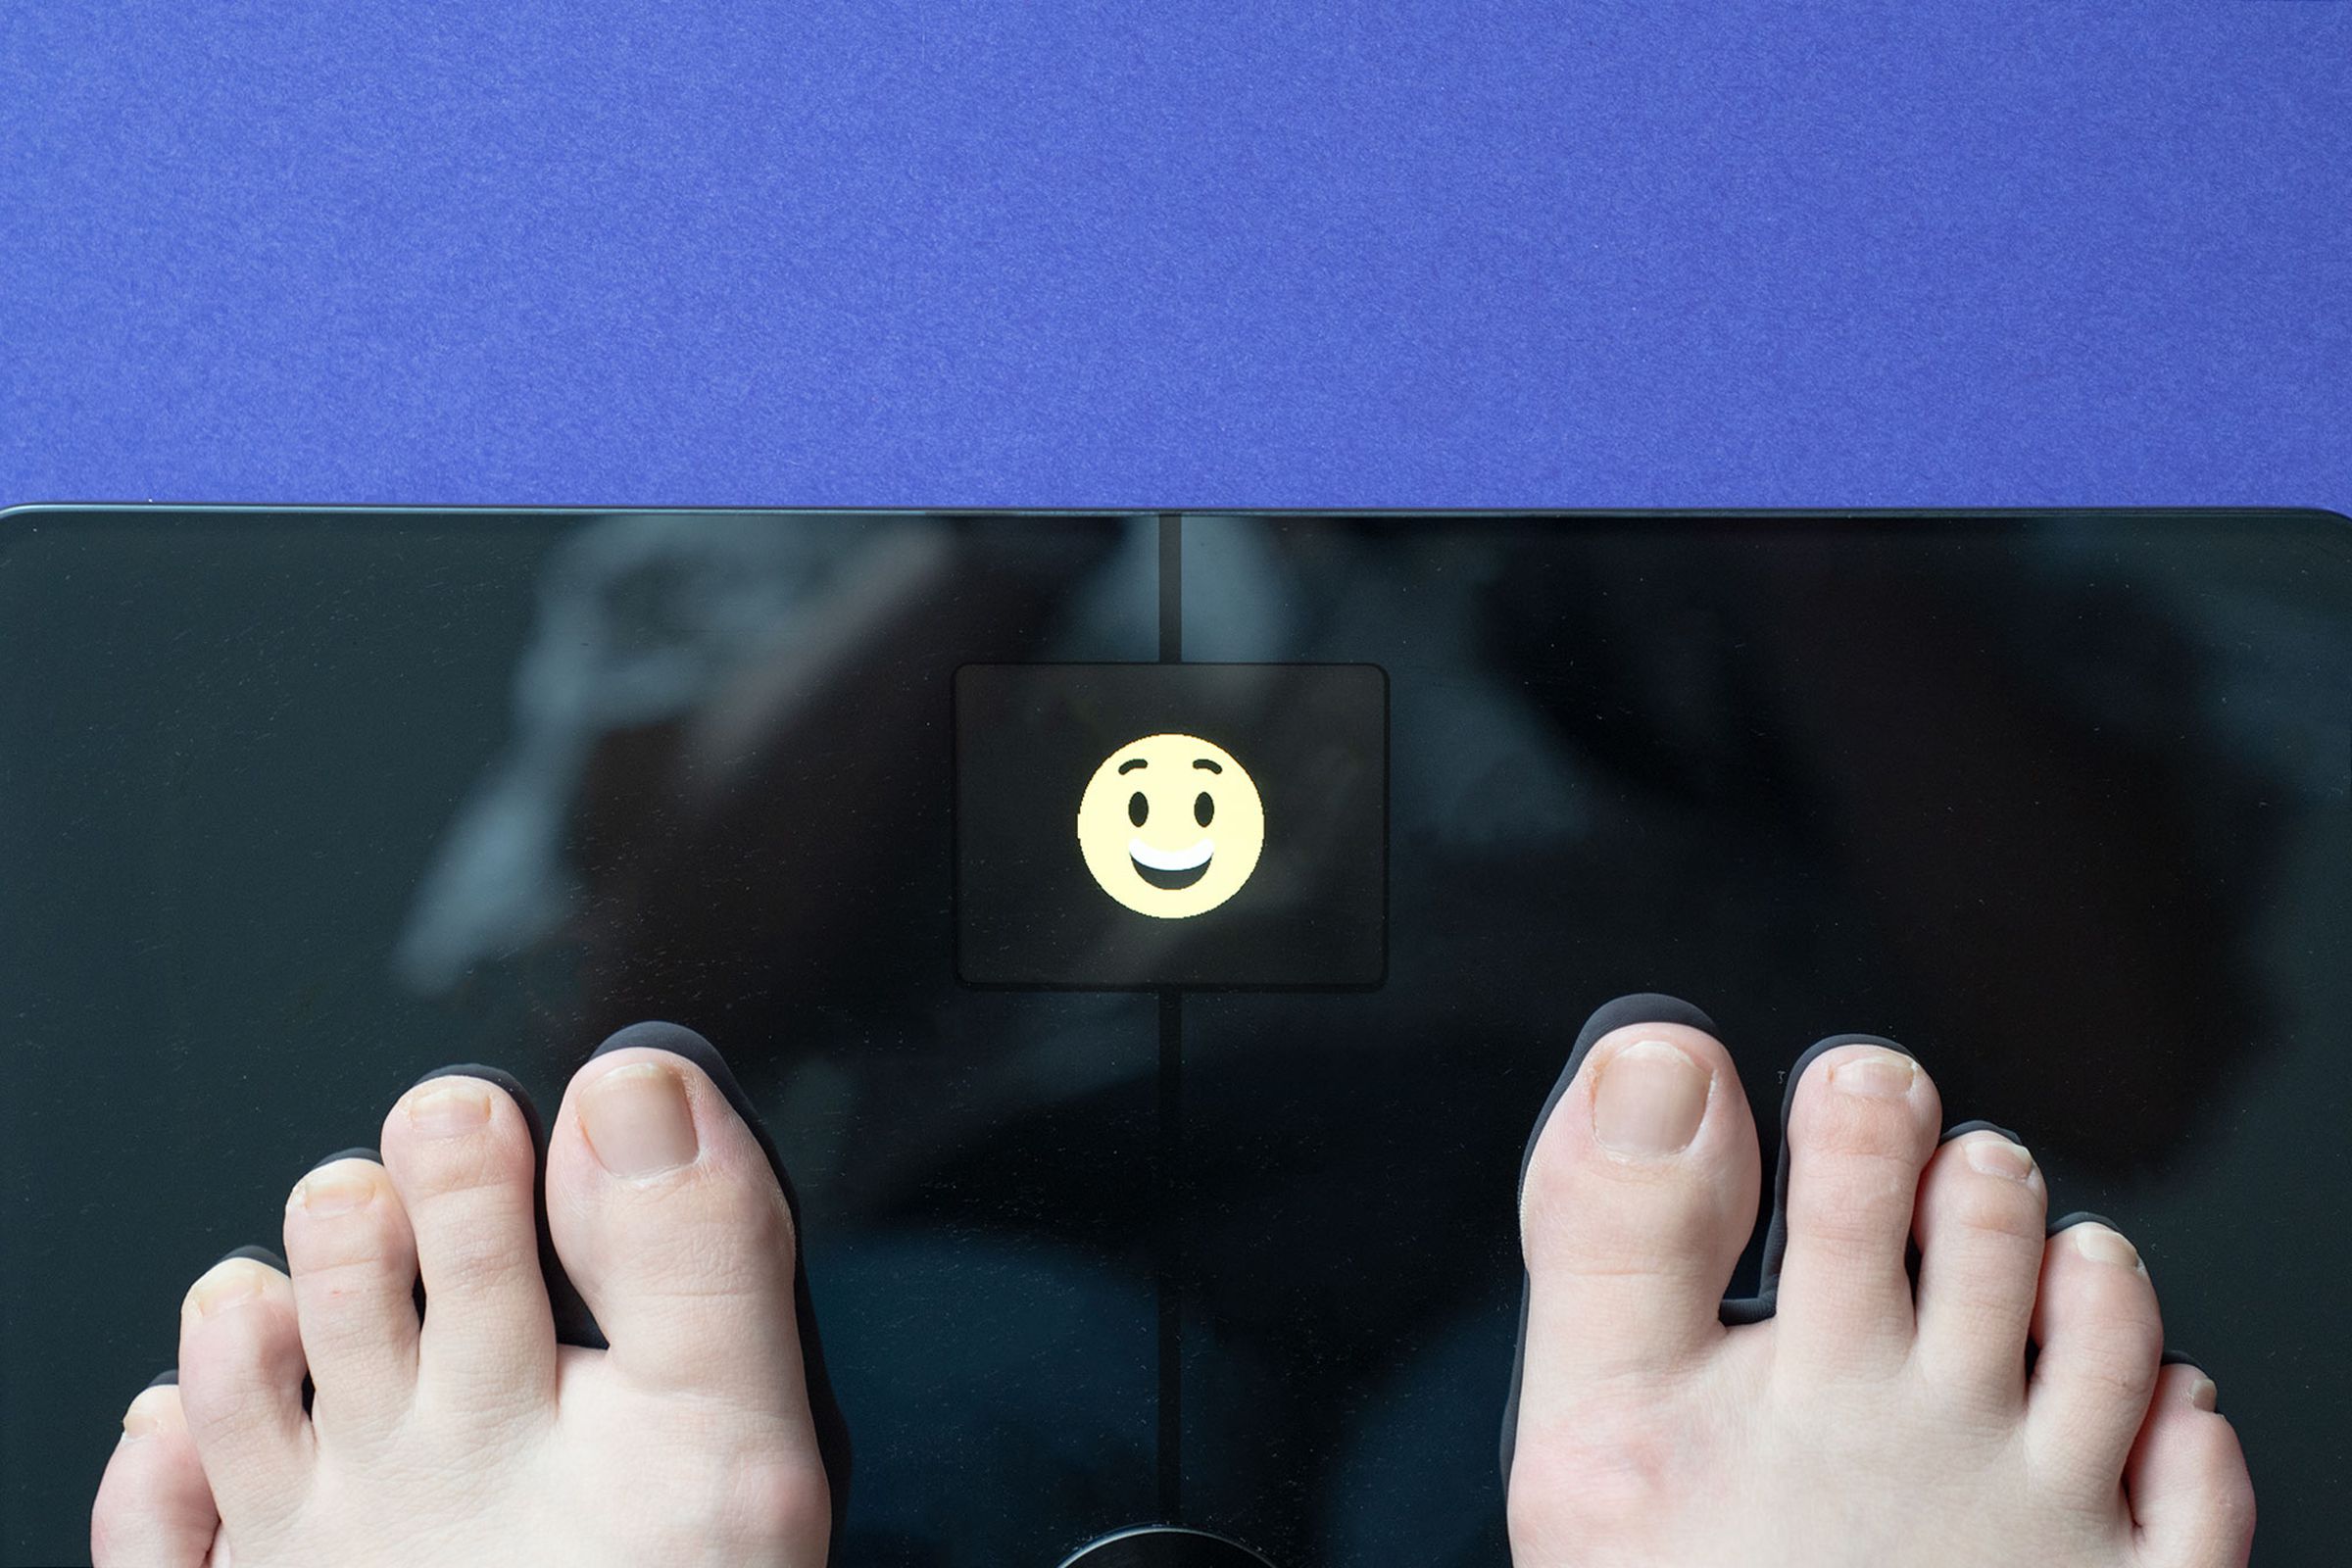 Person standing on scale with smiley face showing in LED display